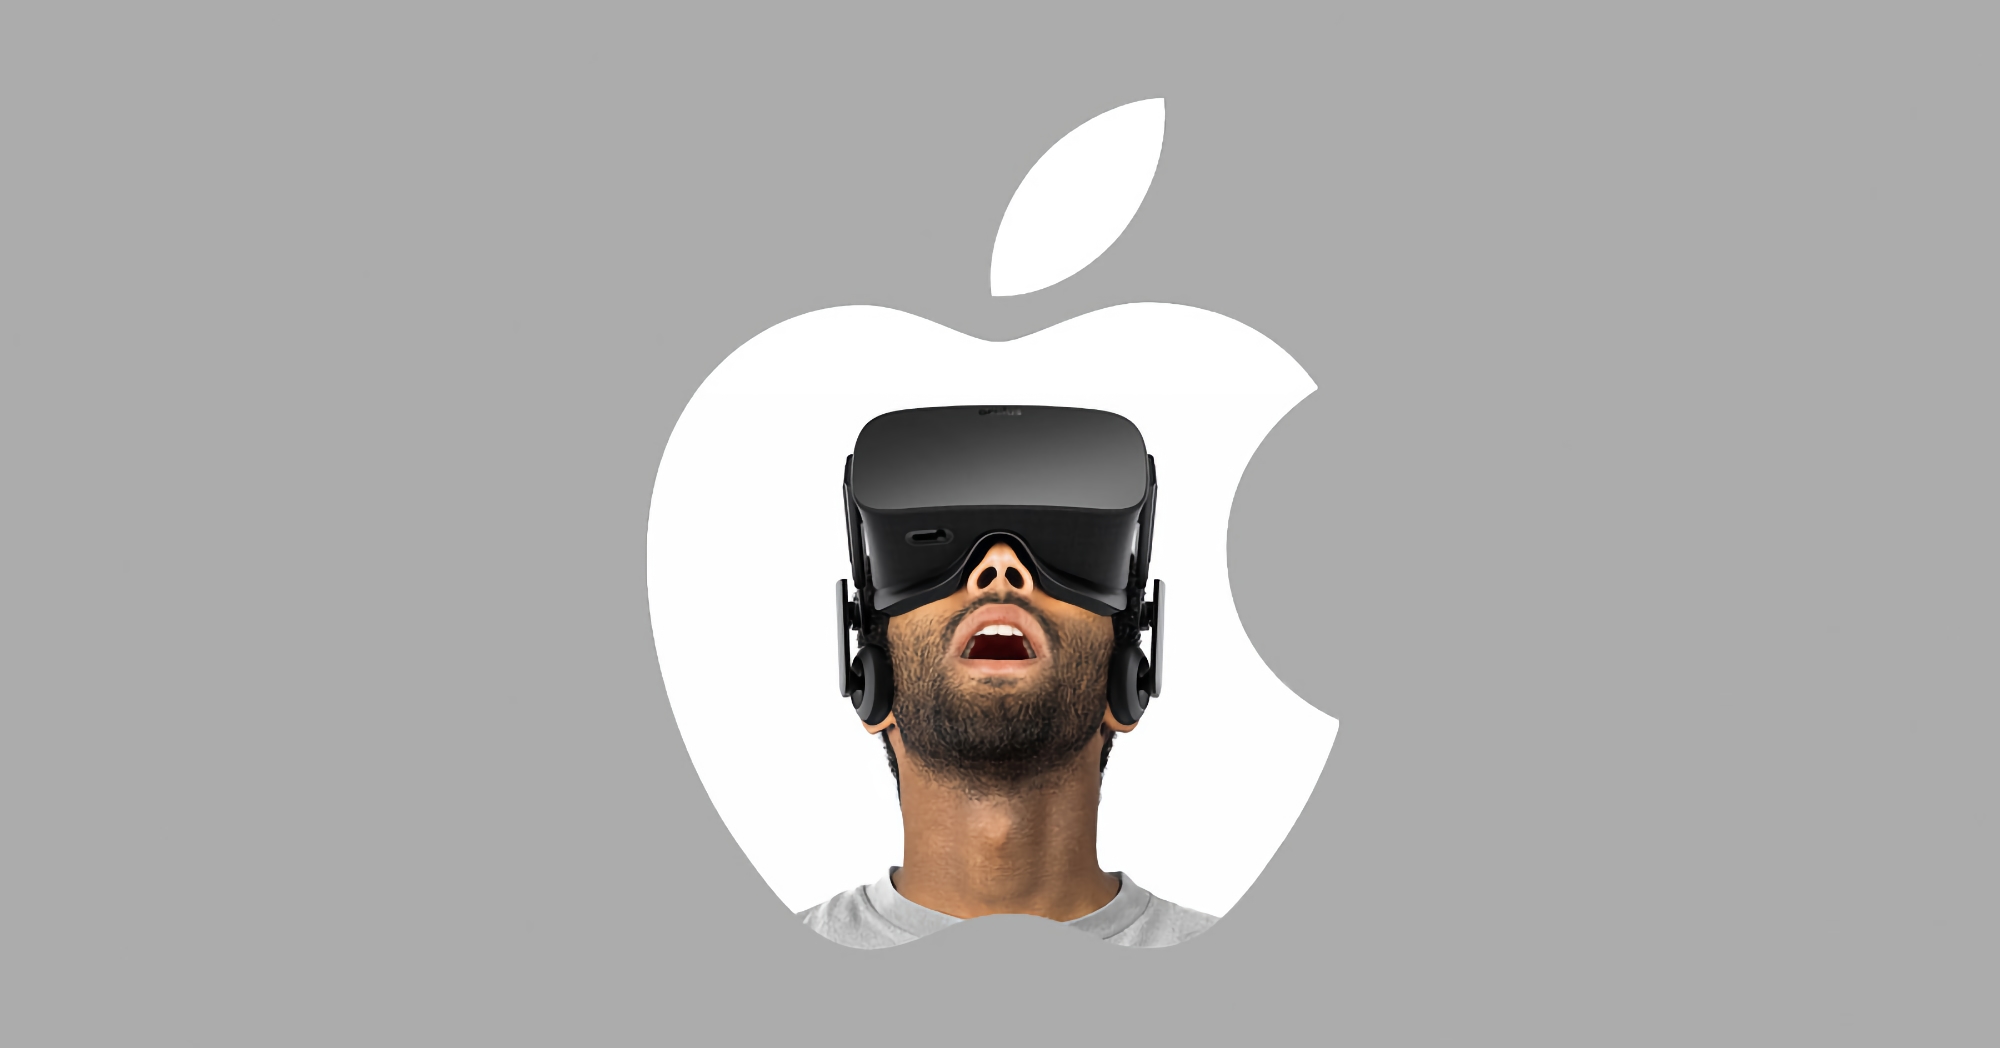 Mark Gurman: Apple will release an owl AR/VR helmet next year and it will be expensive